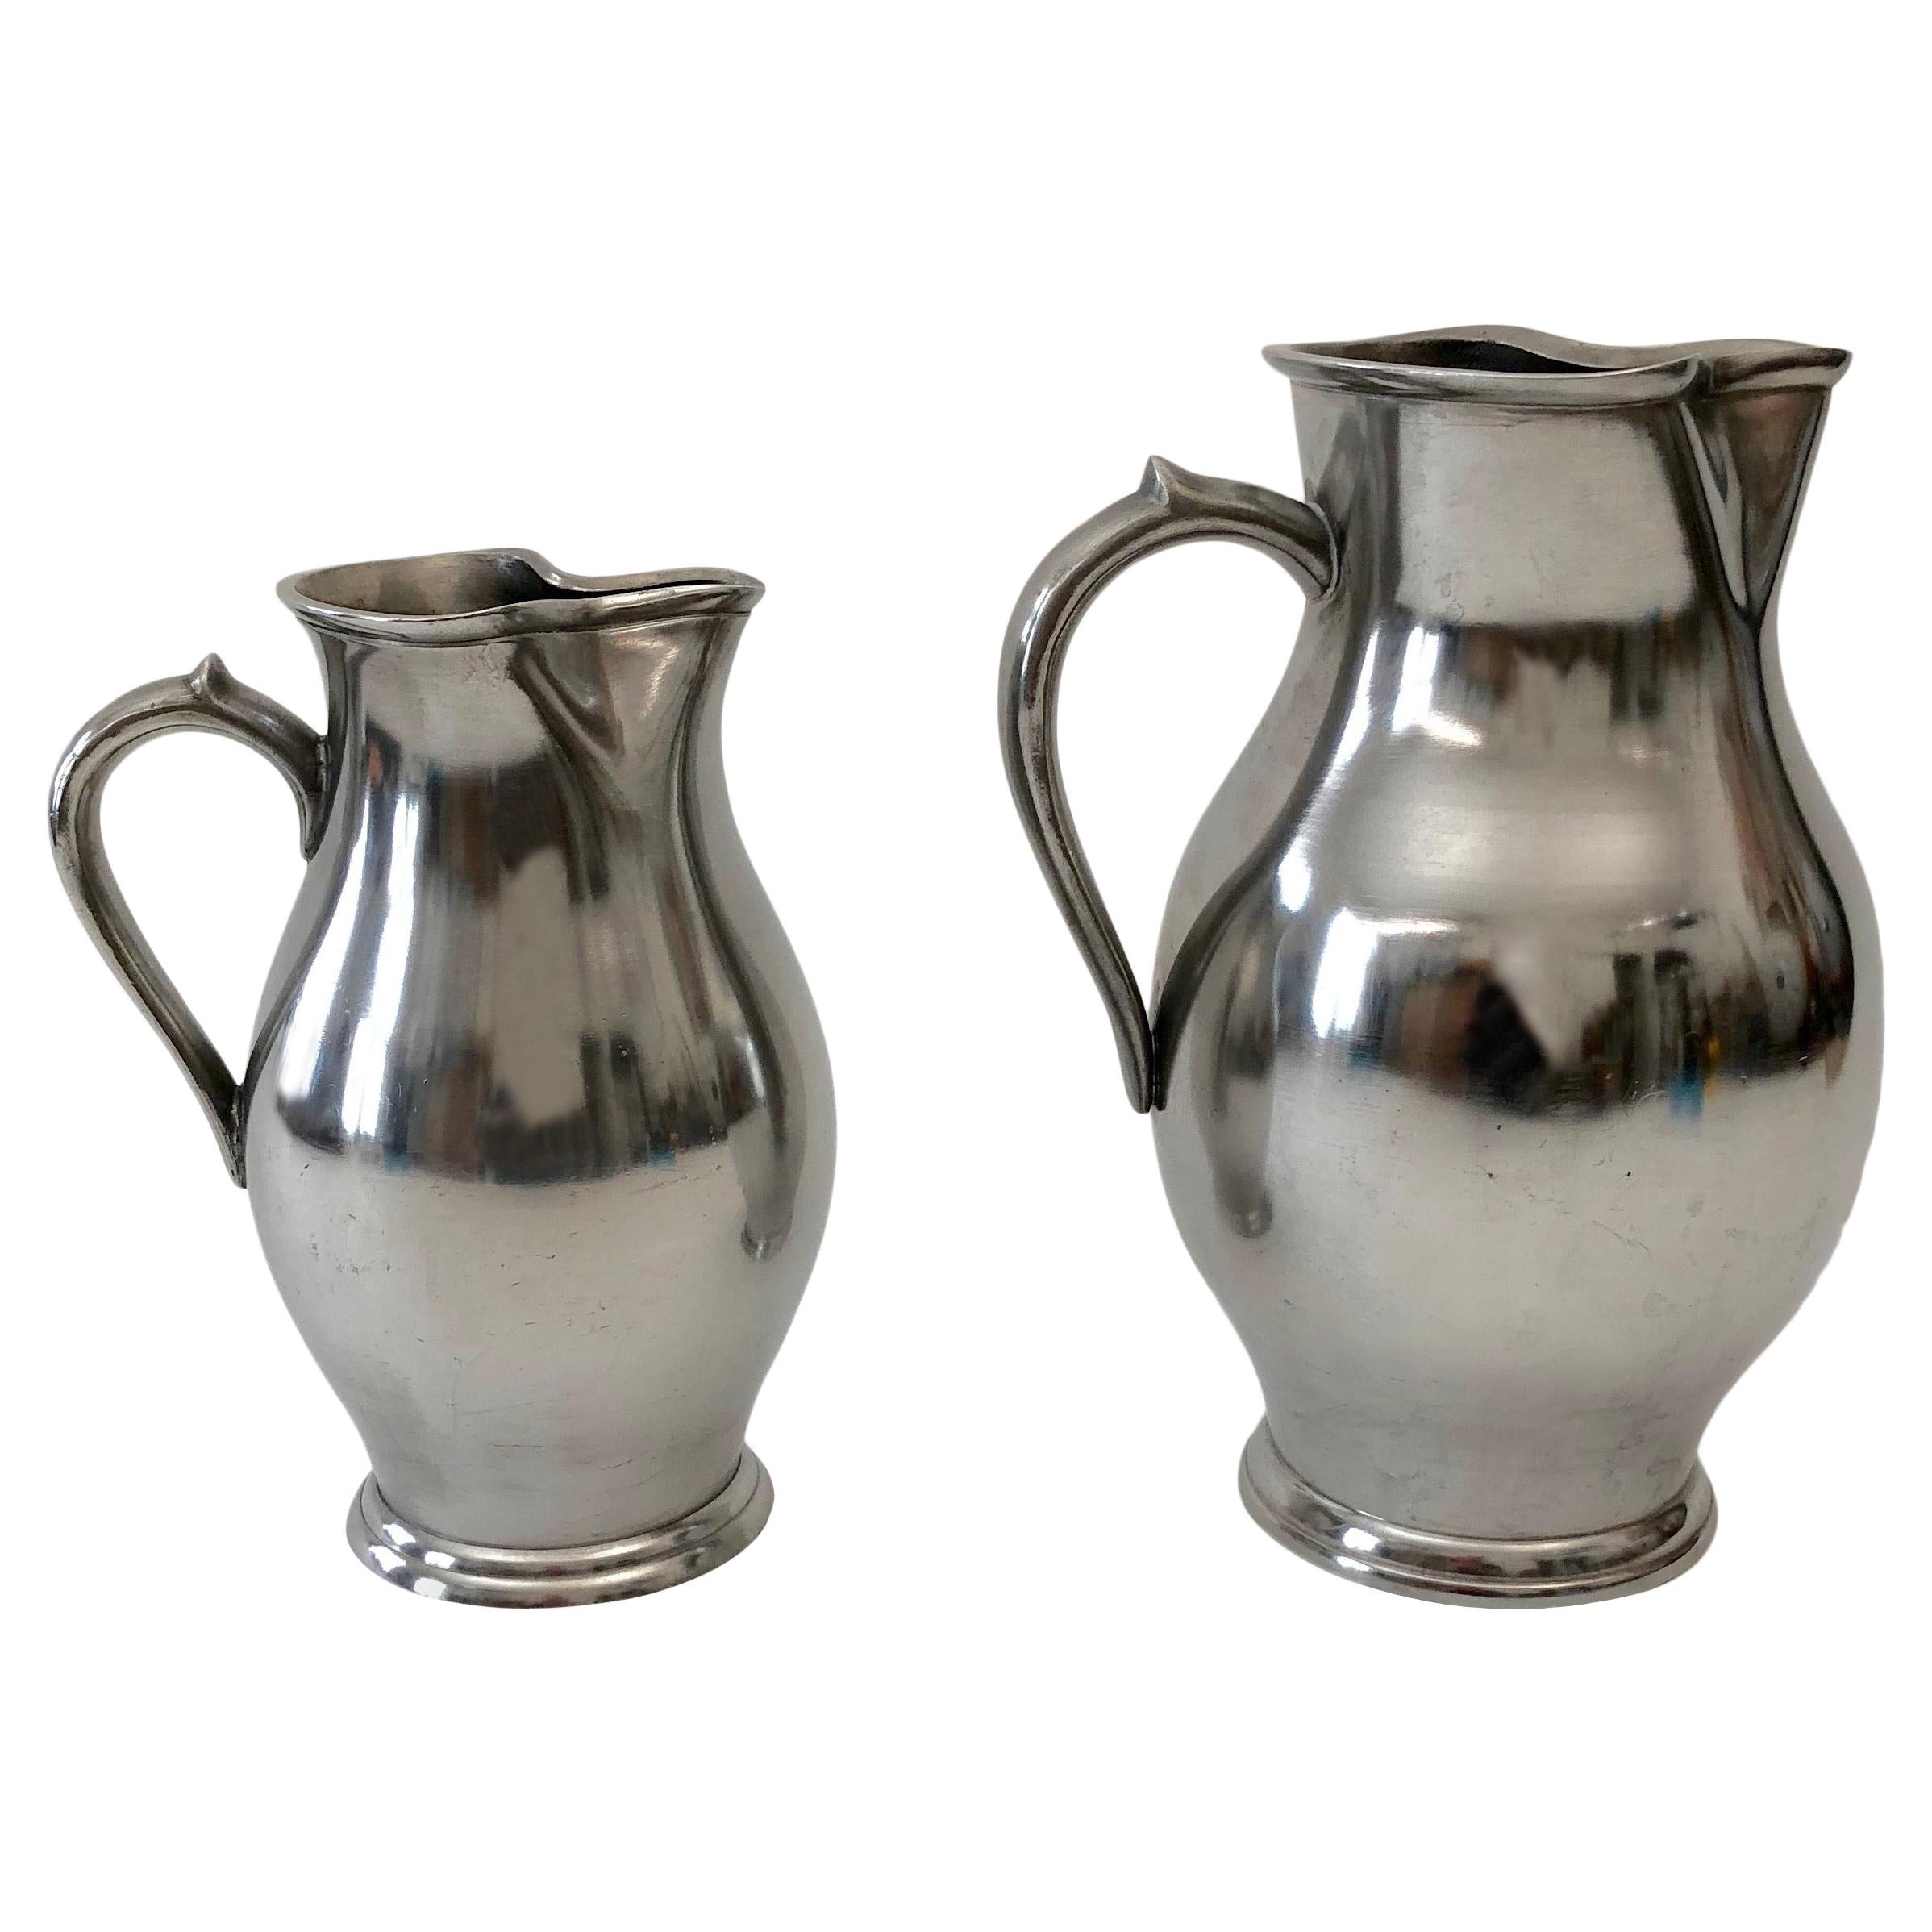 Two Pewter Wine Jugs from the Wiener Zin Manufacture Dated 1837 For Sale